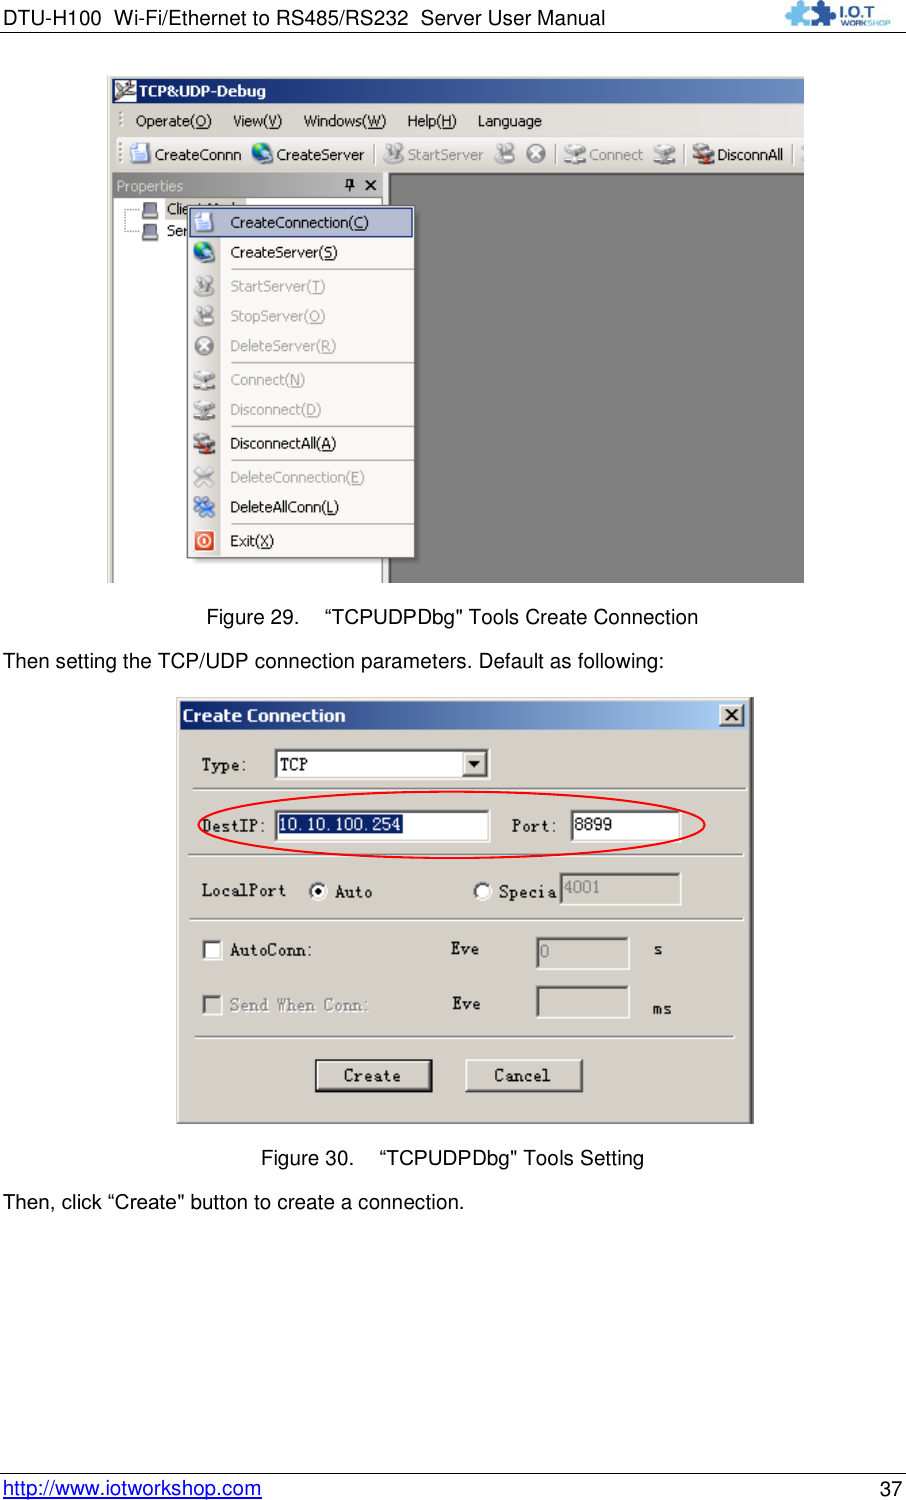 DTU-H100 Wi-Fi/Ethernet to RS485/RS232  Server User Manual    http://www.iotworkshop.com 37  Figure 29.  “TCPUDPDbg&quot; Tools Create Connection Then setting the TCP/UDP connection parameters. Default as following:   Figure 30.  “TCPUDPDbg&quot; Tools Setting Then, click “Create&quot; button to create a connection.   